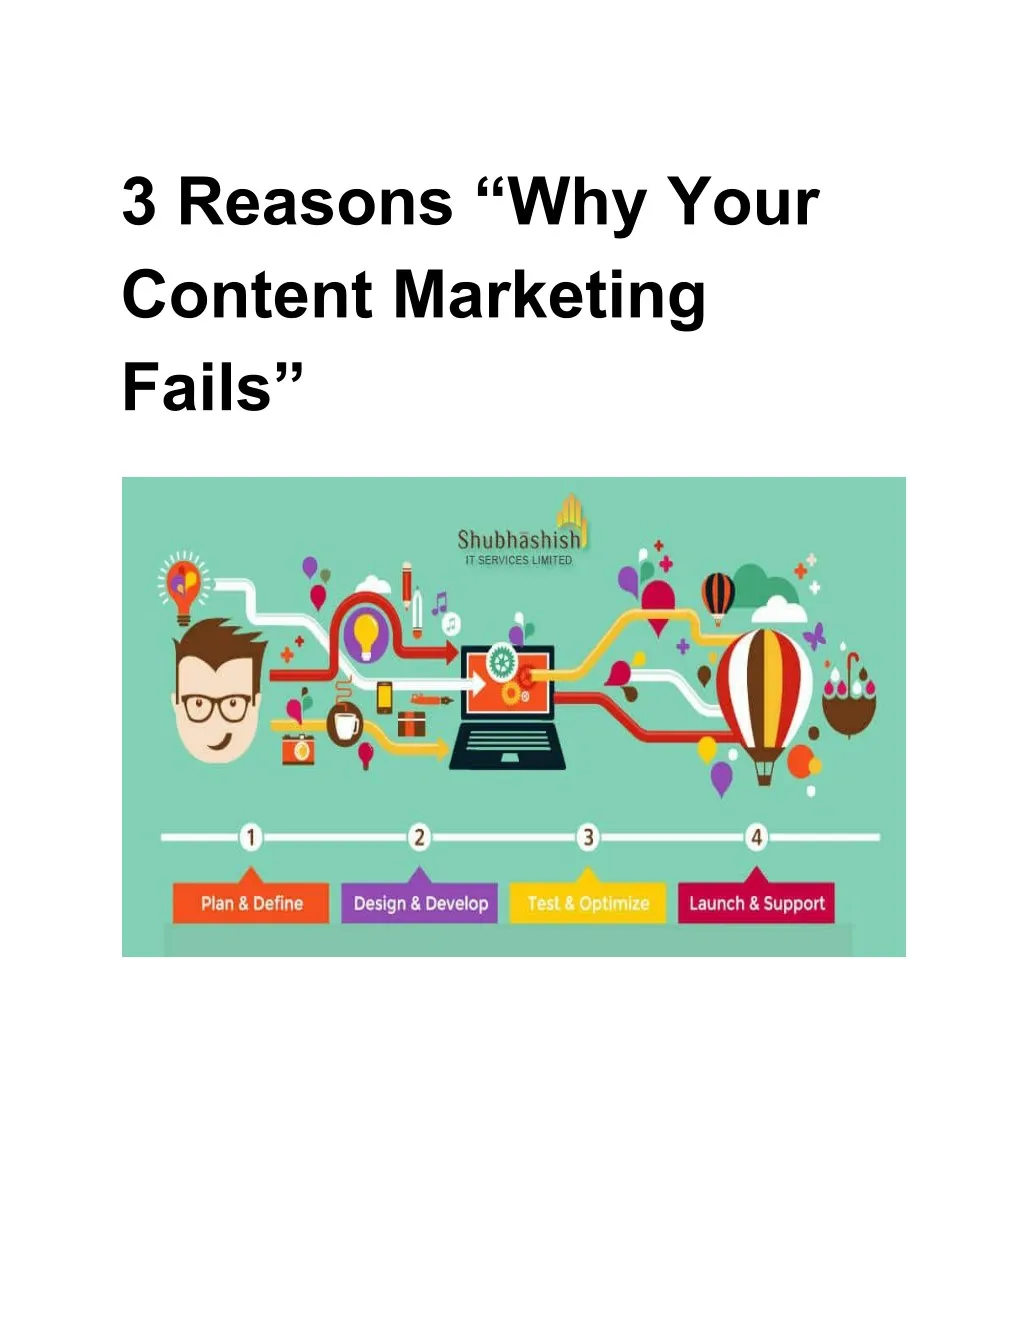 3 reasons why your content marketing fails